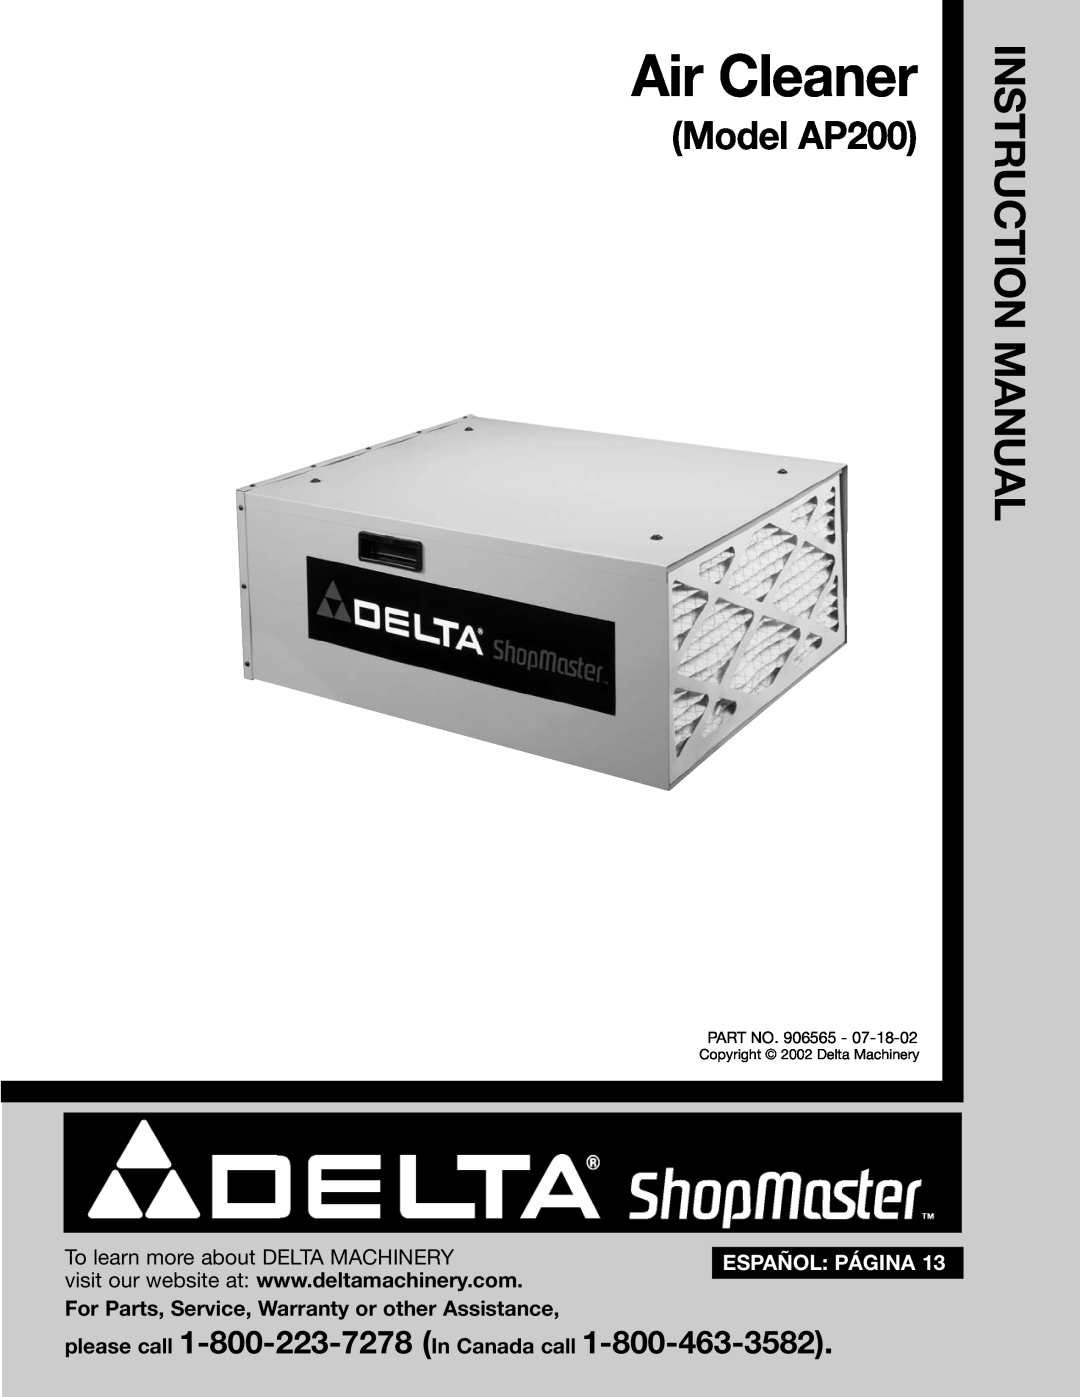 Delta instruction manual Air Cleaner, Model AP200, To learn more about DELTA MACHINERY, Español Página 